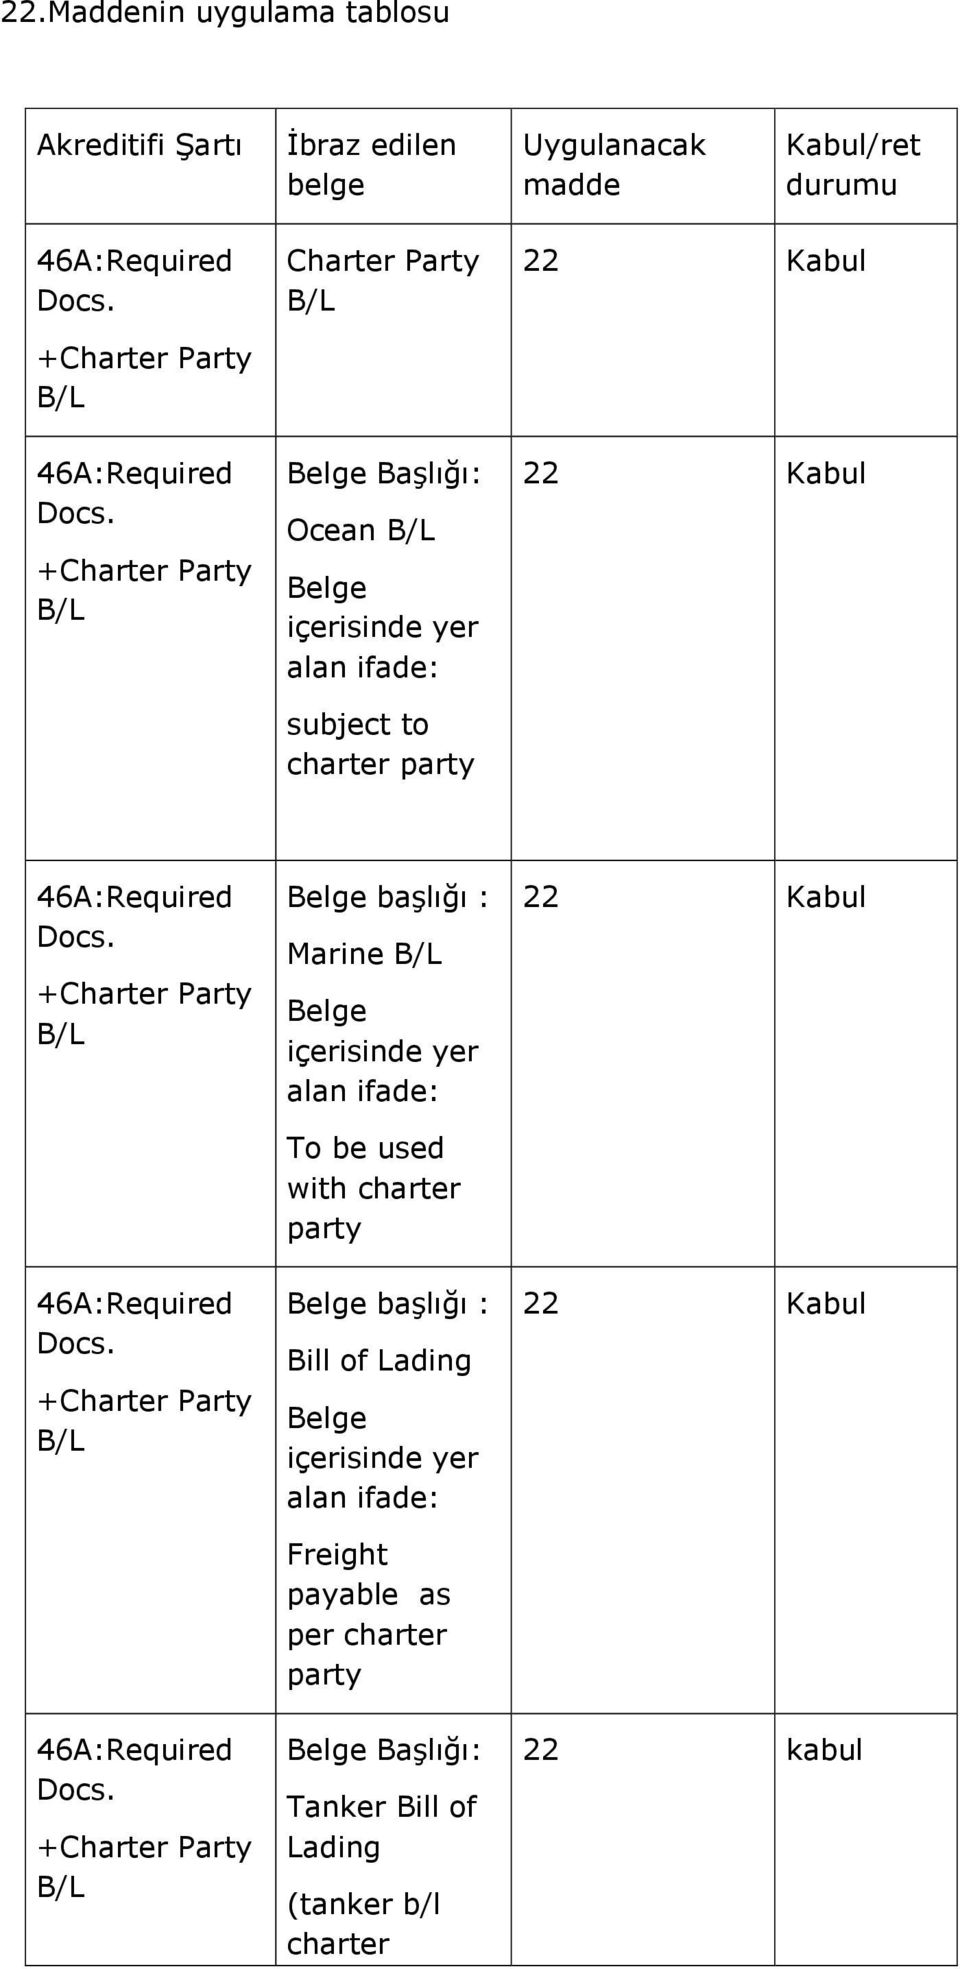 +Charter Party B/L 46A:Required Docs. +Charter Party B/L 46A:Required Docs.